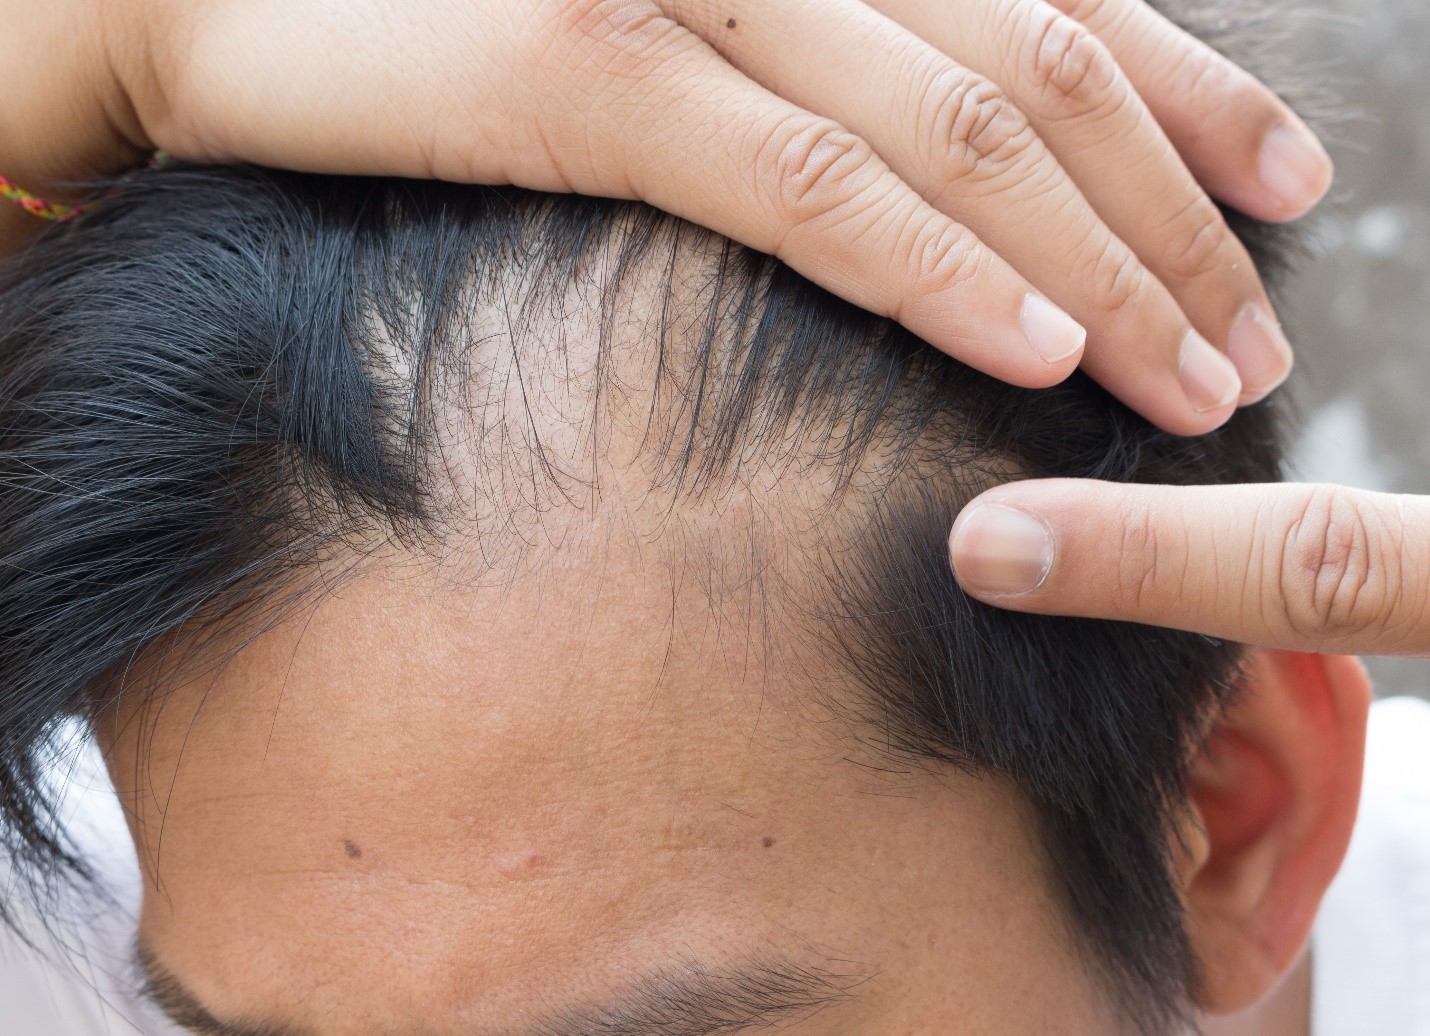 Understanding The Types Of Hair Loss To Determine The Right Solution